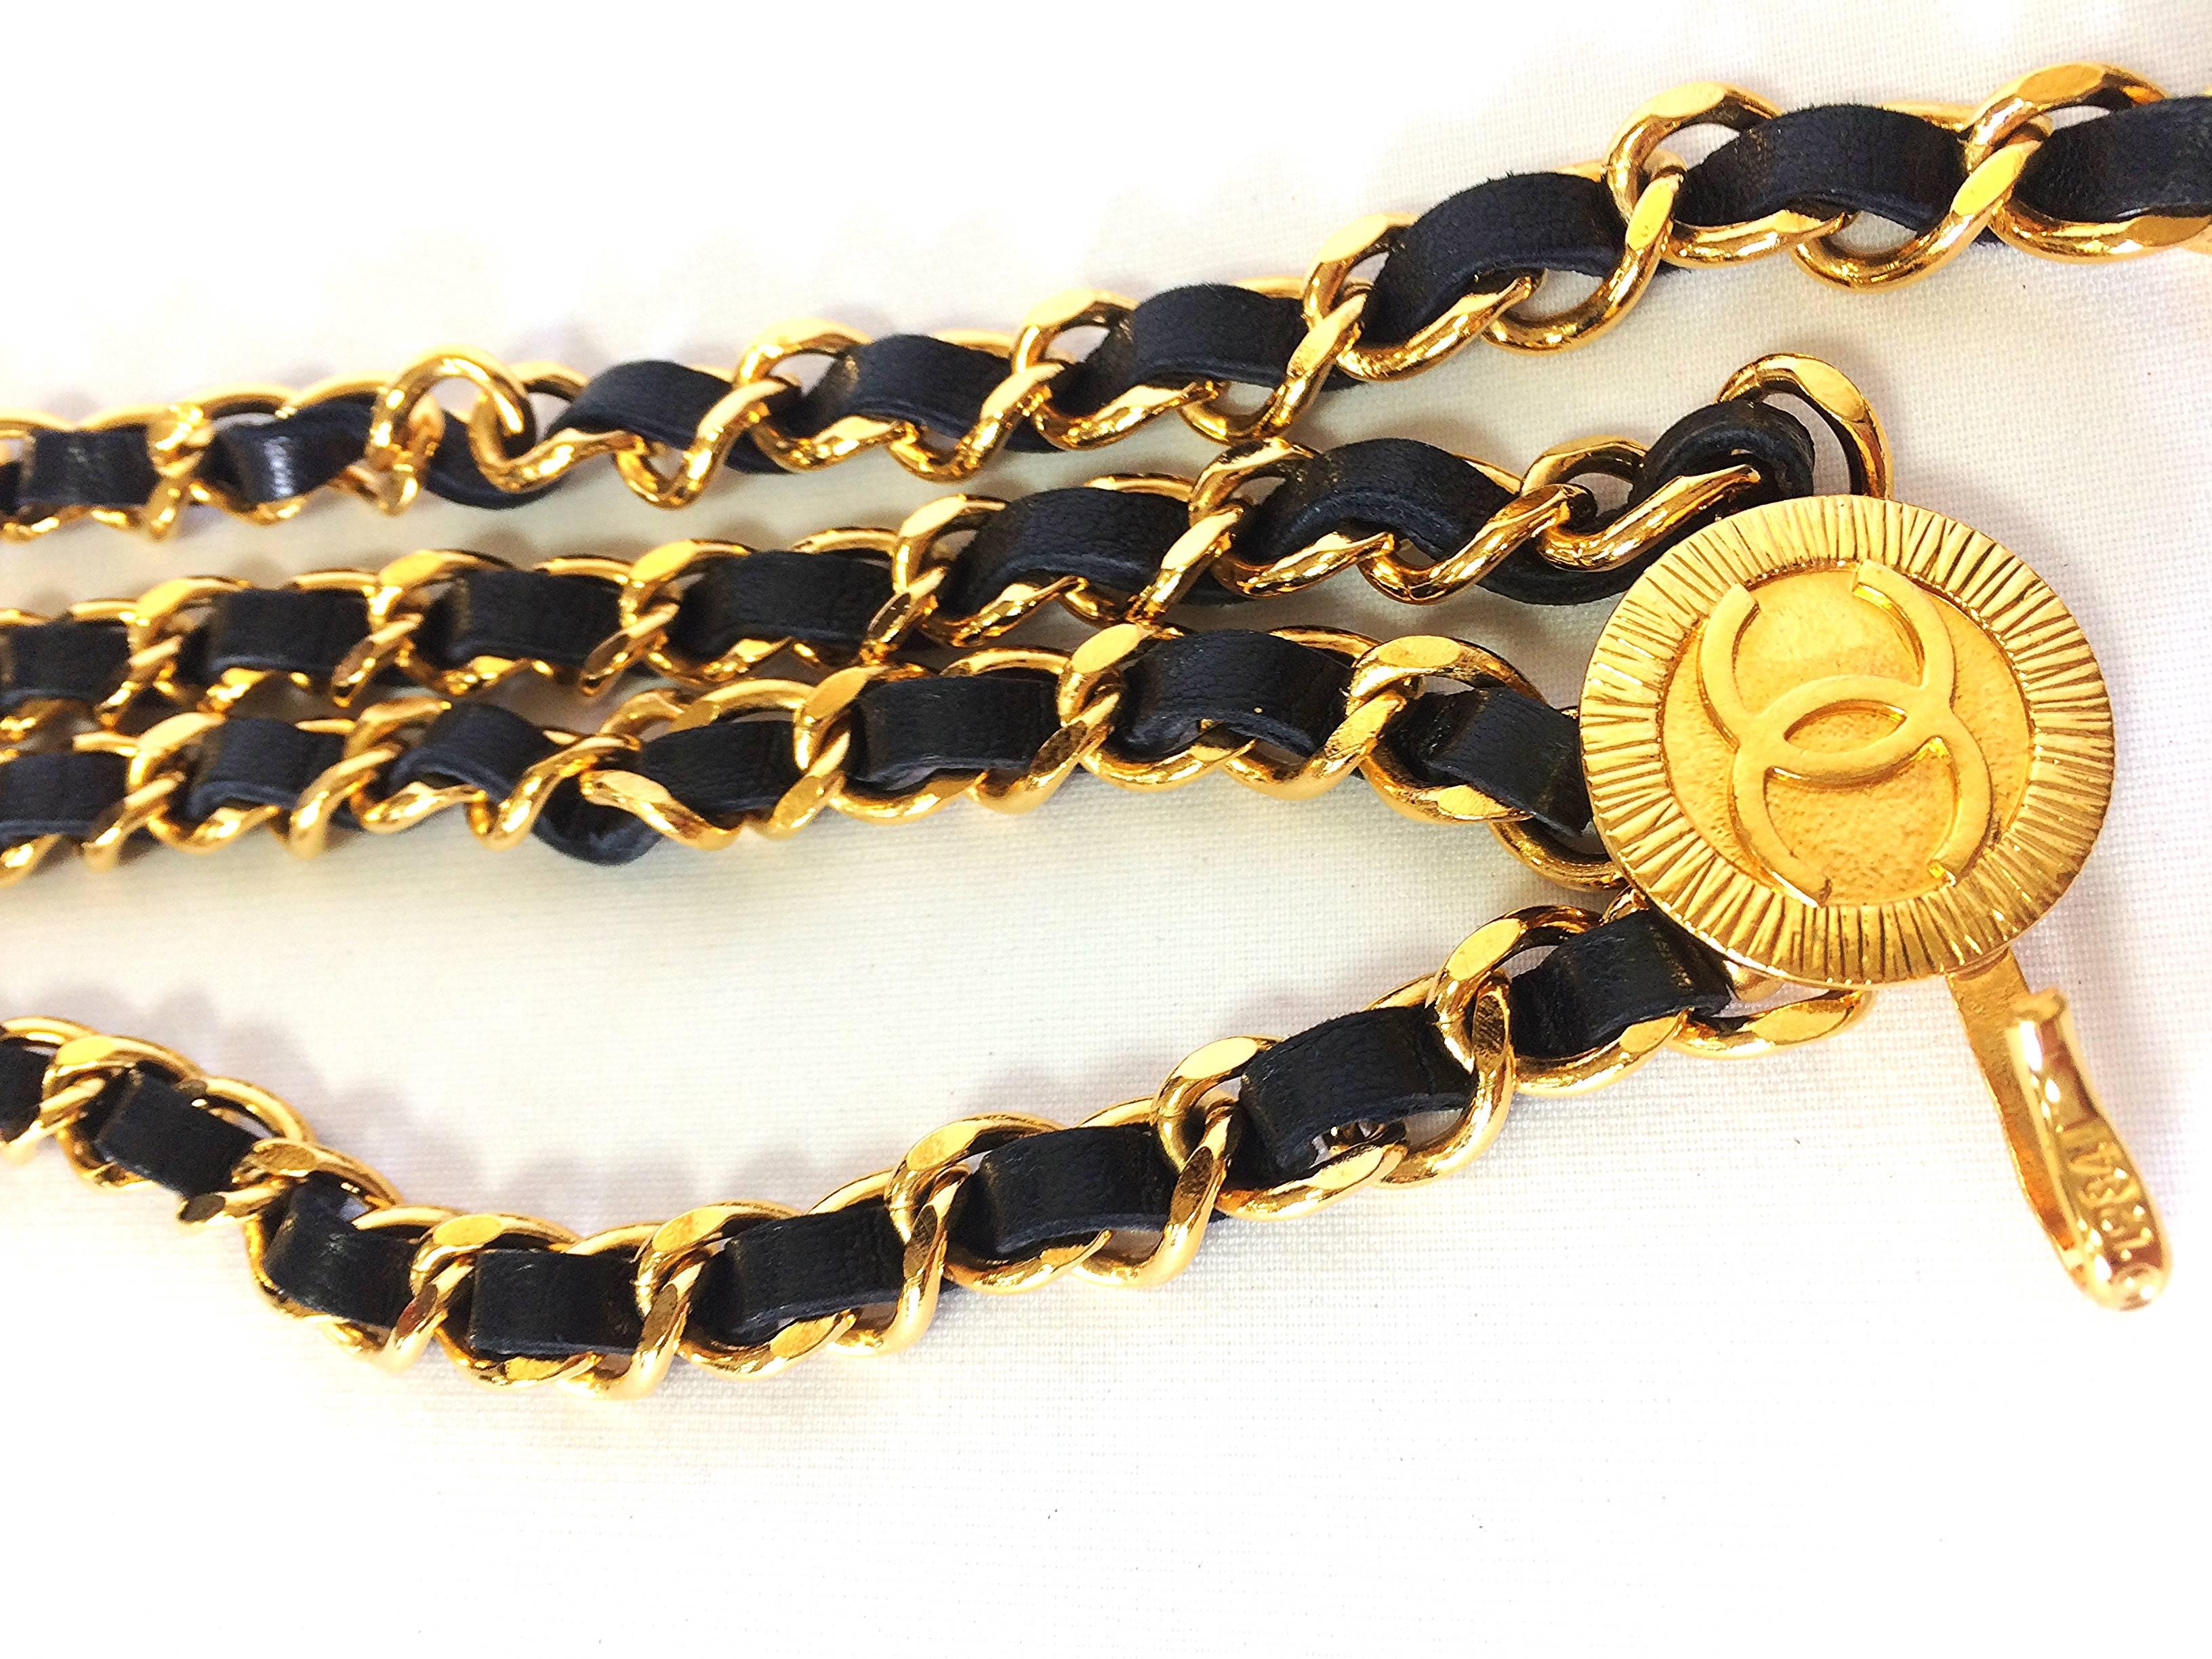 MINT. 1980's Vintage CHANEL 3 layered black leather and golden chain belt 1